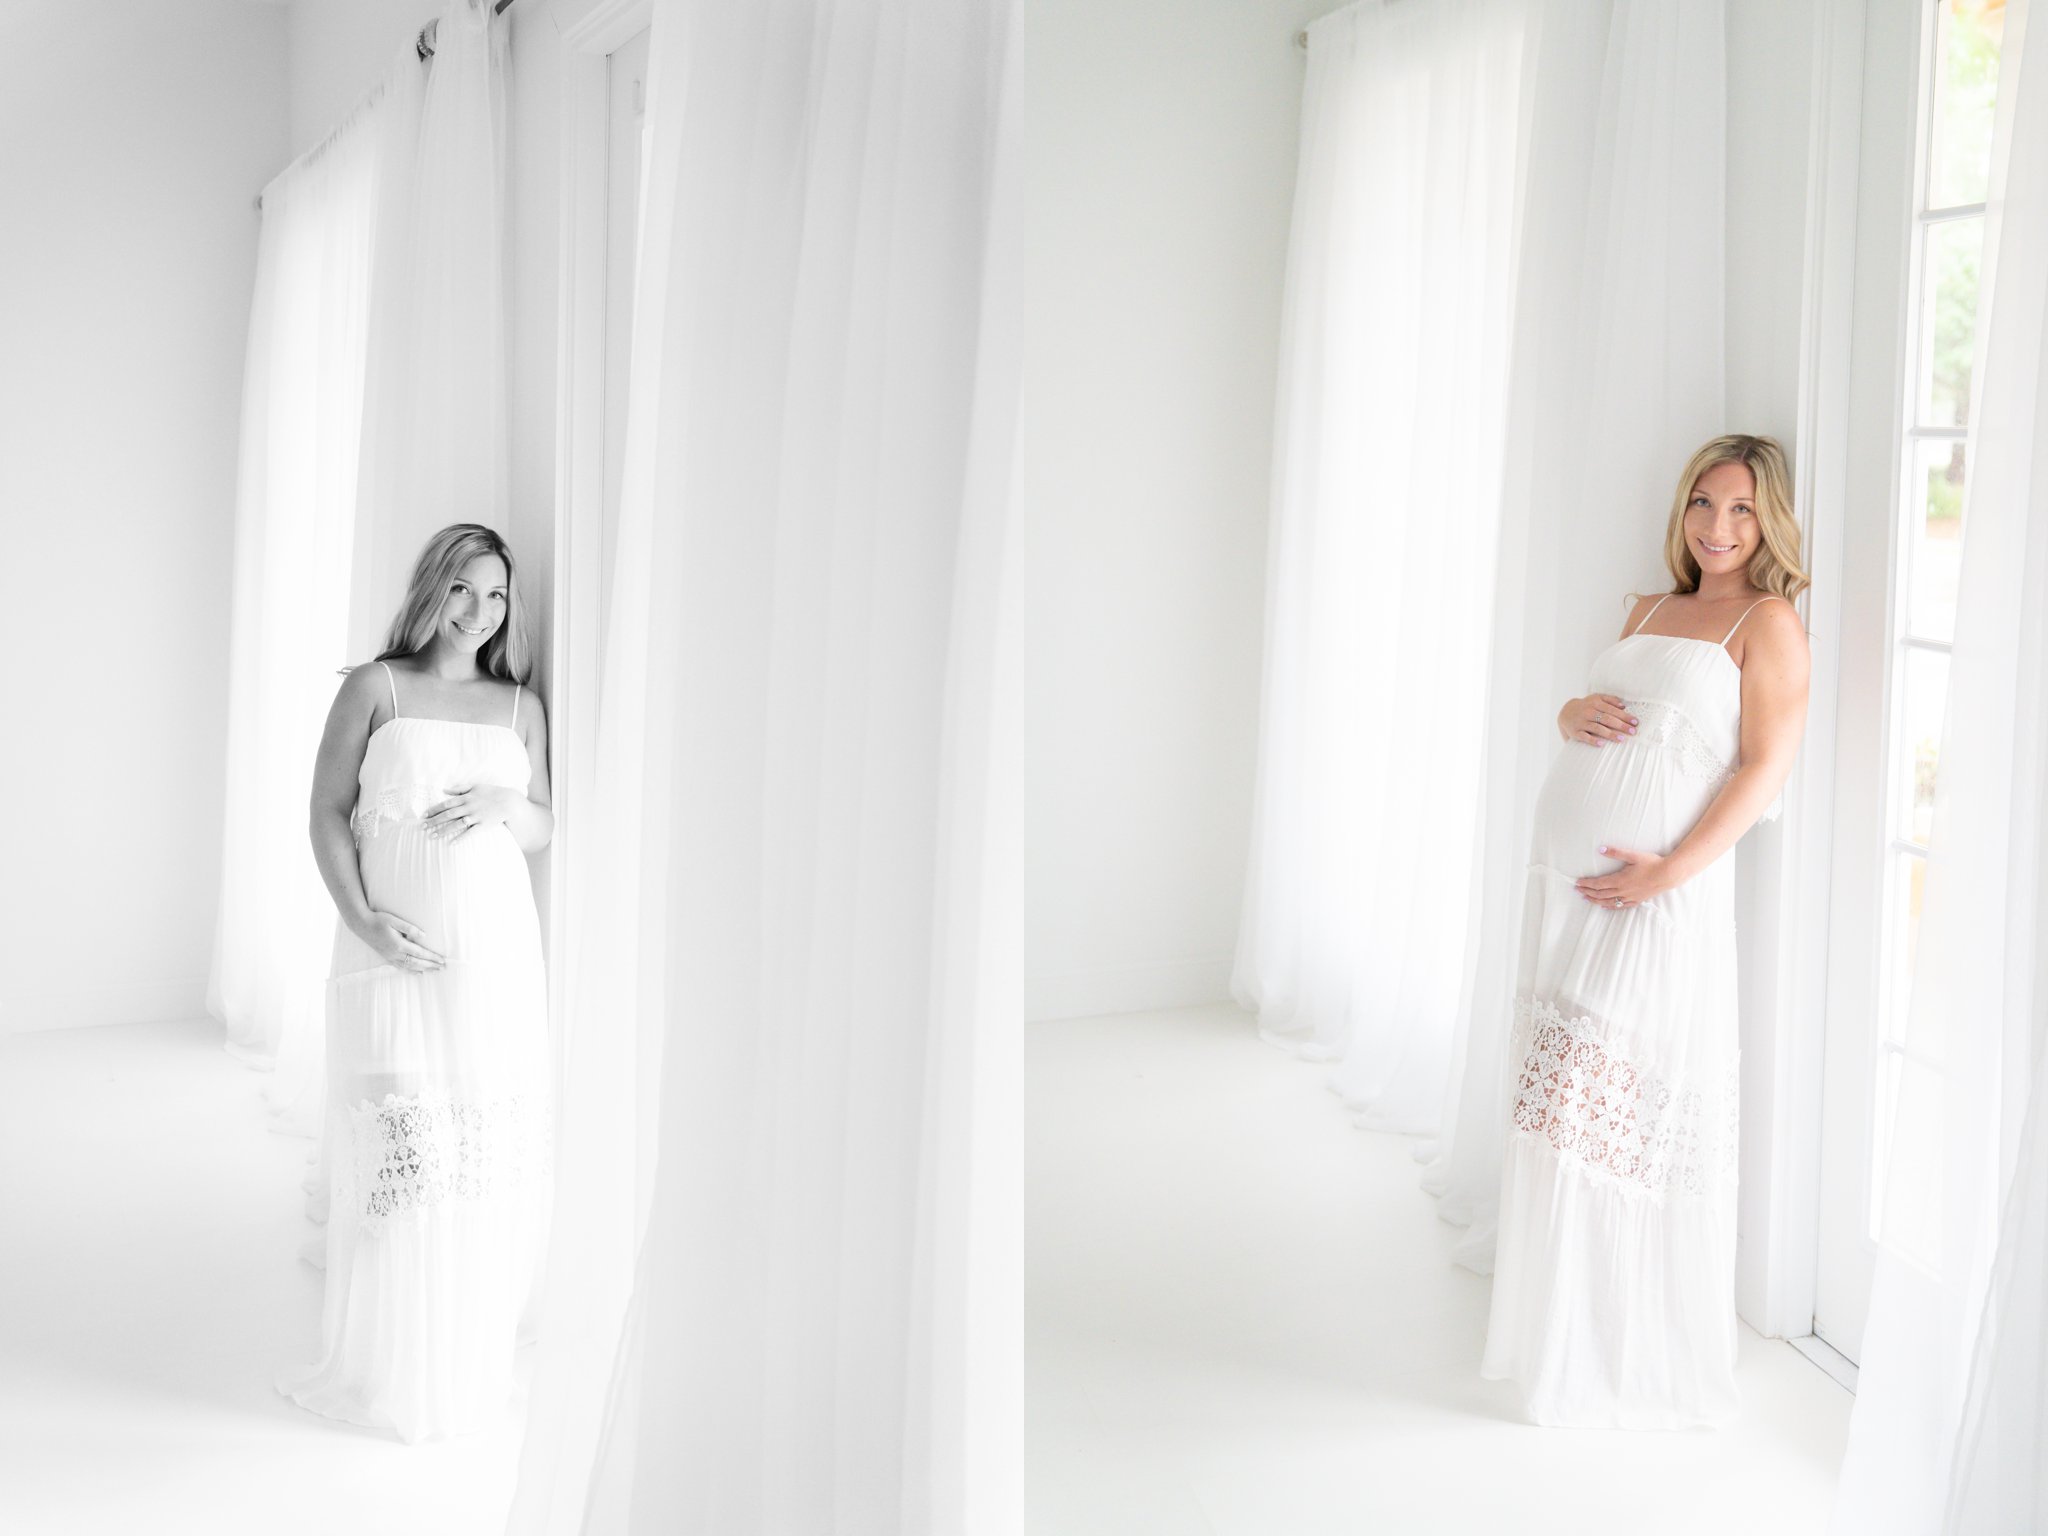 Pregnant woman standing by large window being photographed during maternity session